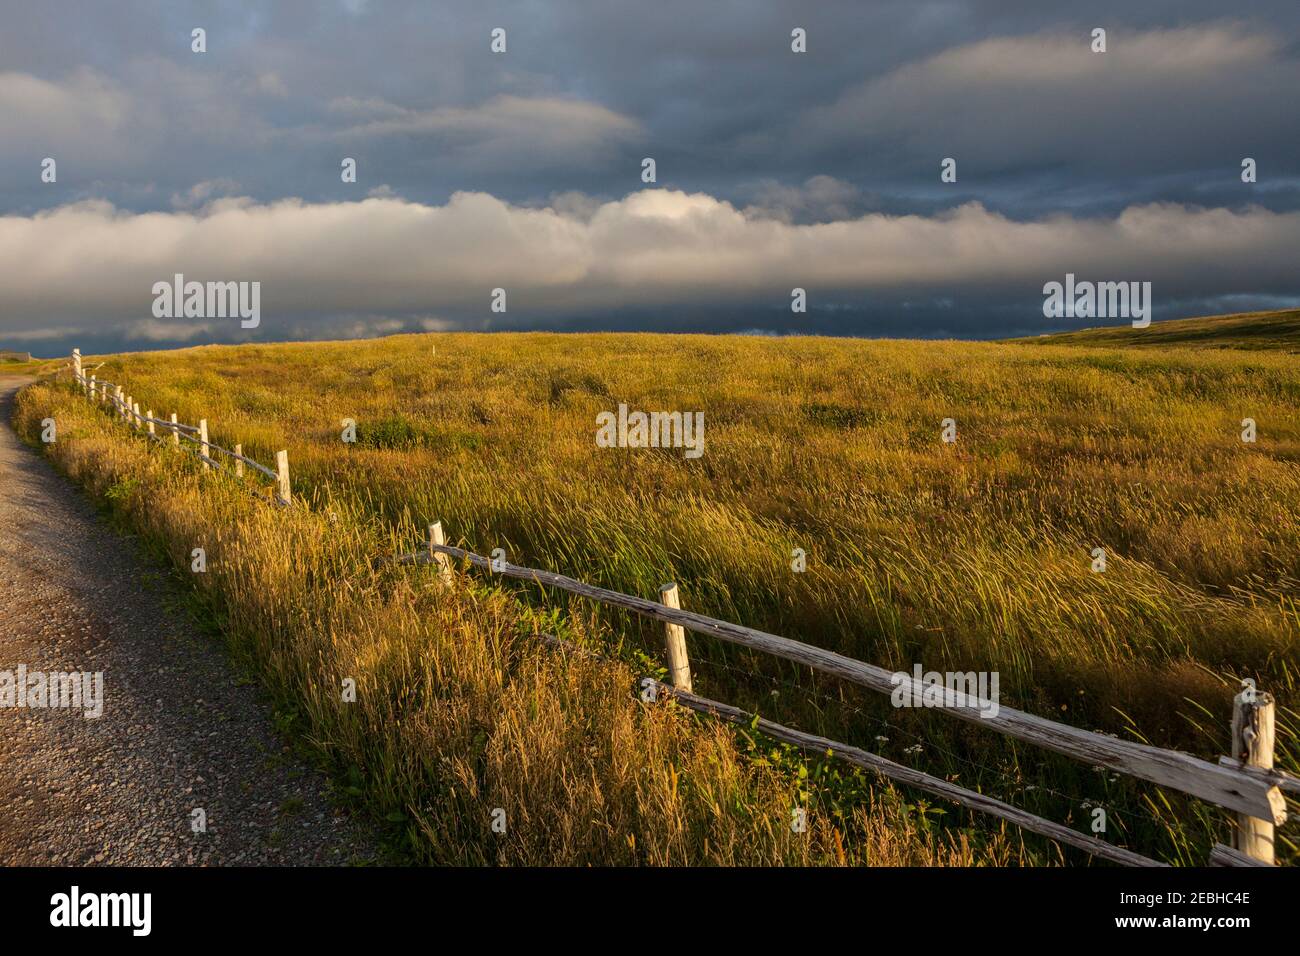 Landscape, Clouds, ocean and fence in the early morning, St. Bride's, Newfoundland Stock Photo